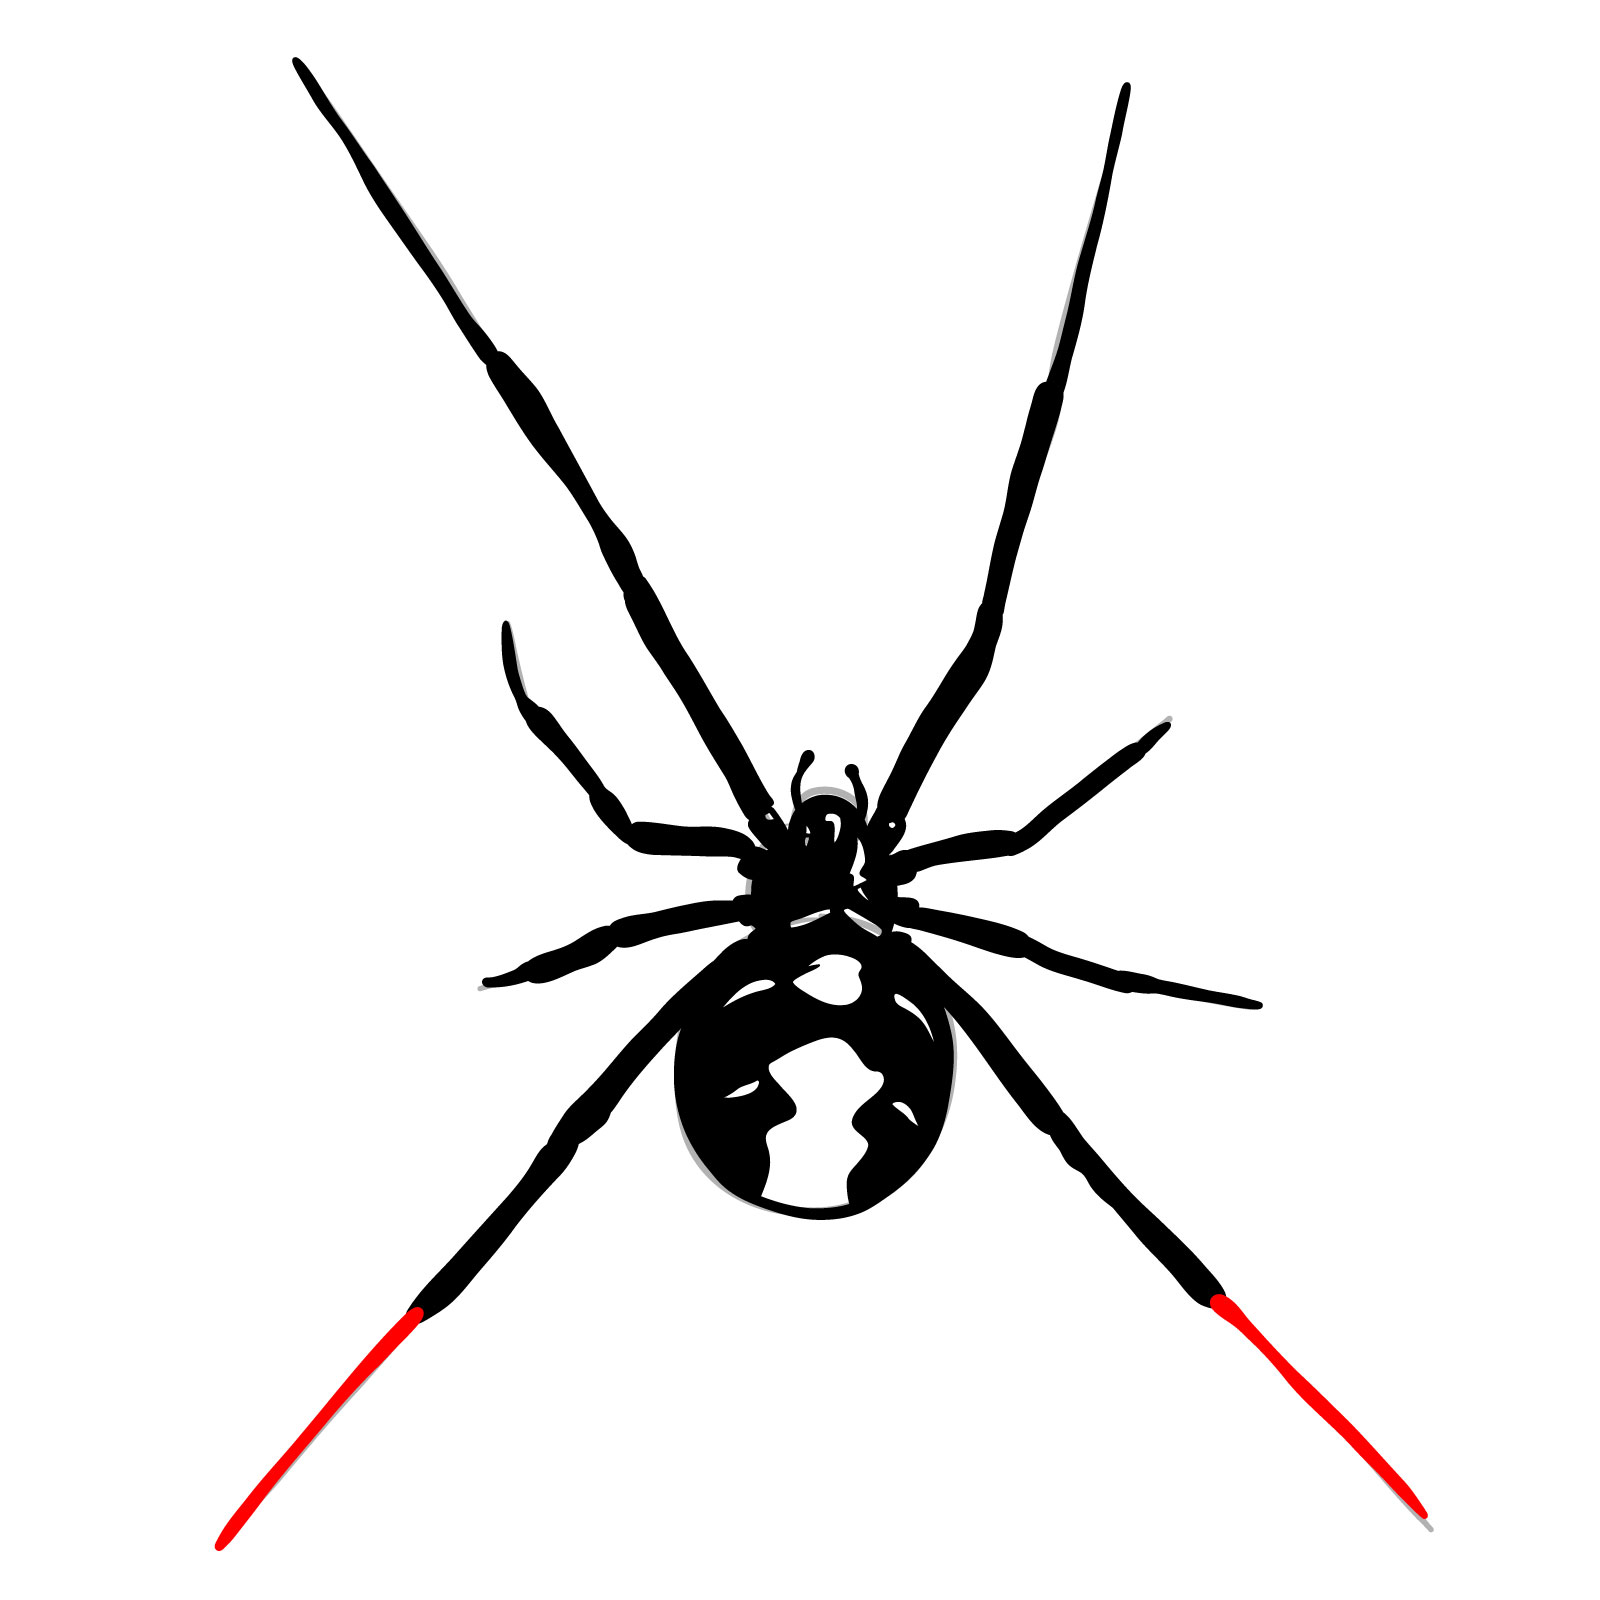 How to draw a Black Widow Spider - step 19